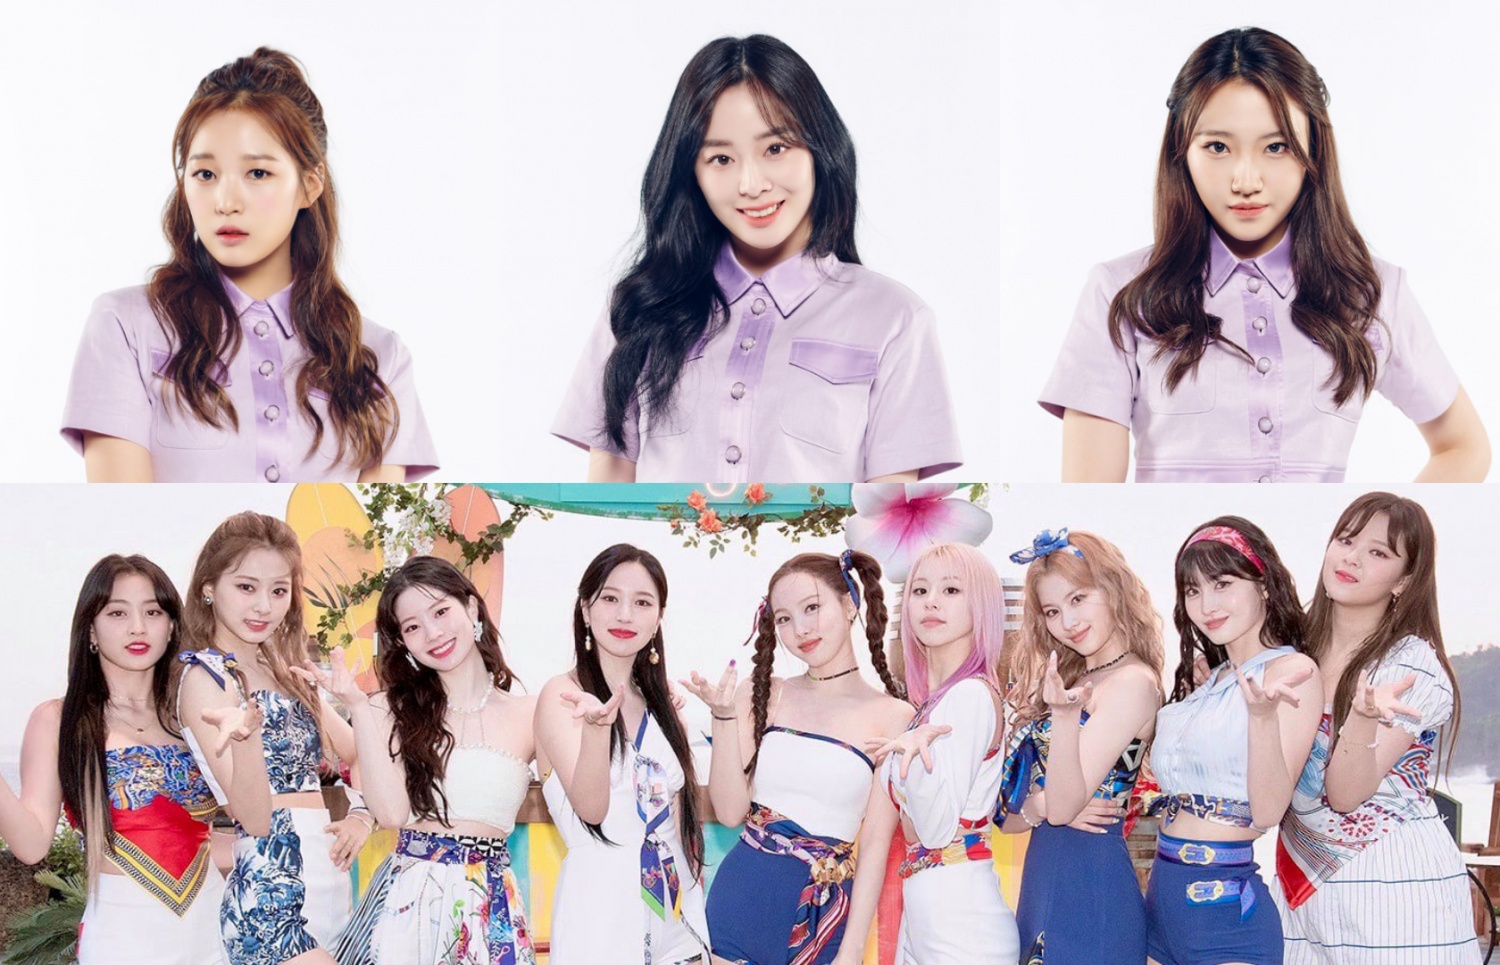 Planet 999 Members / Girls Planet 999 Line Up And Songs Girl Group Profiles